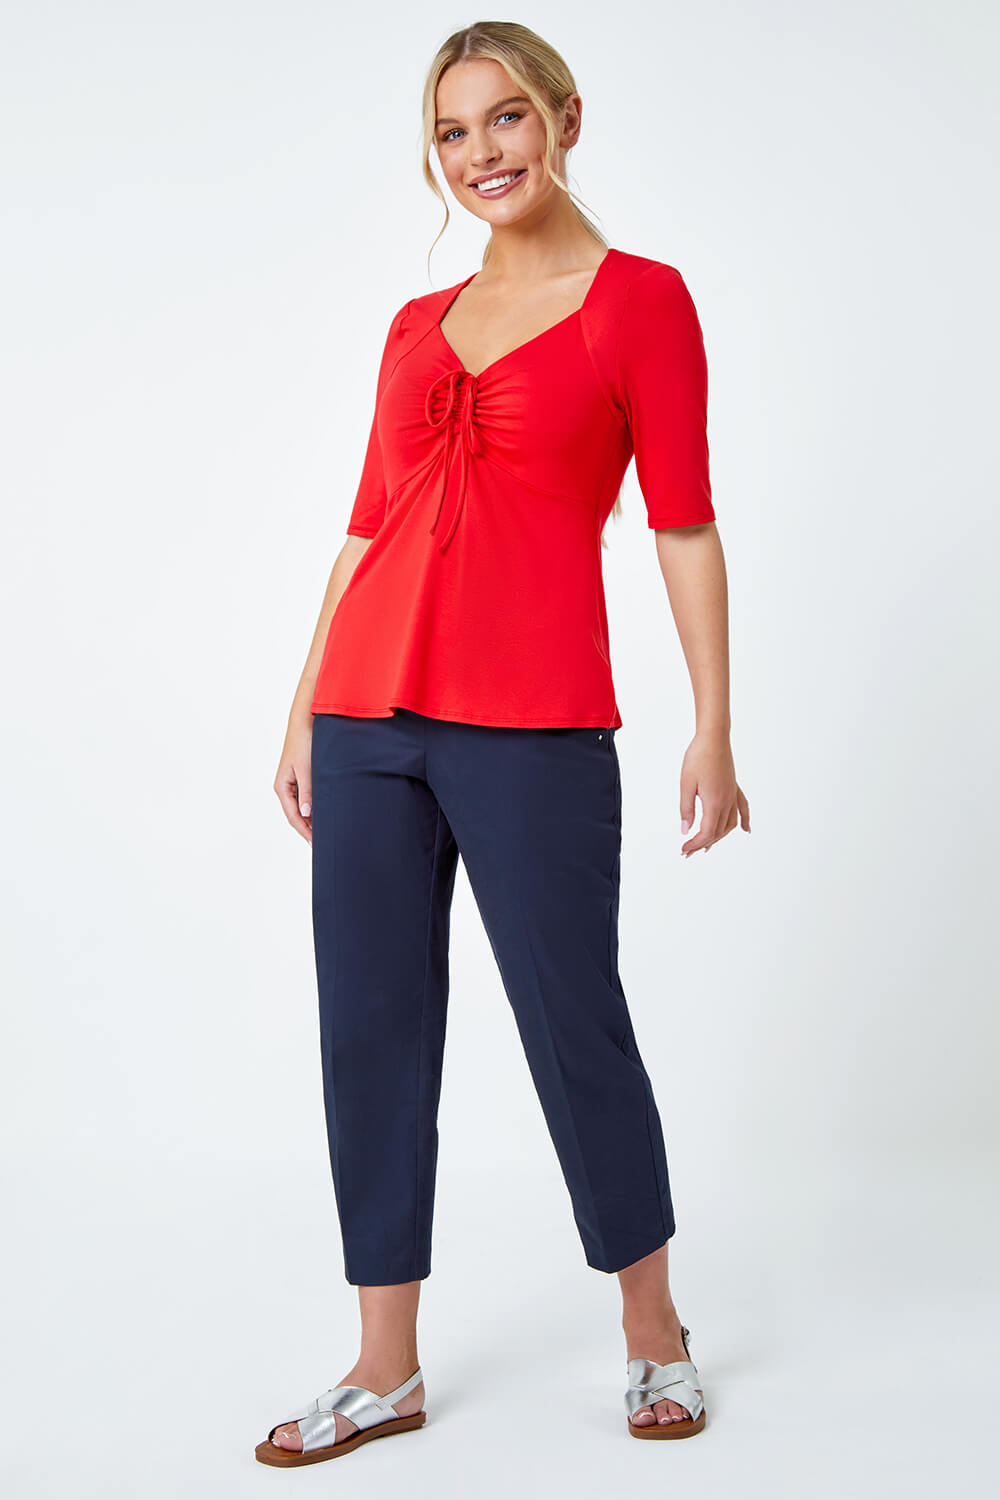 Red Petite Ruched Ribbed Stretch Top, Image 4 of 6